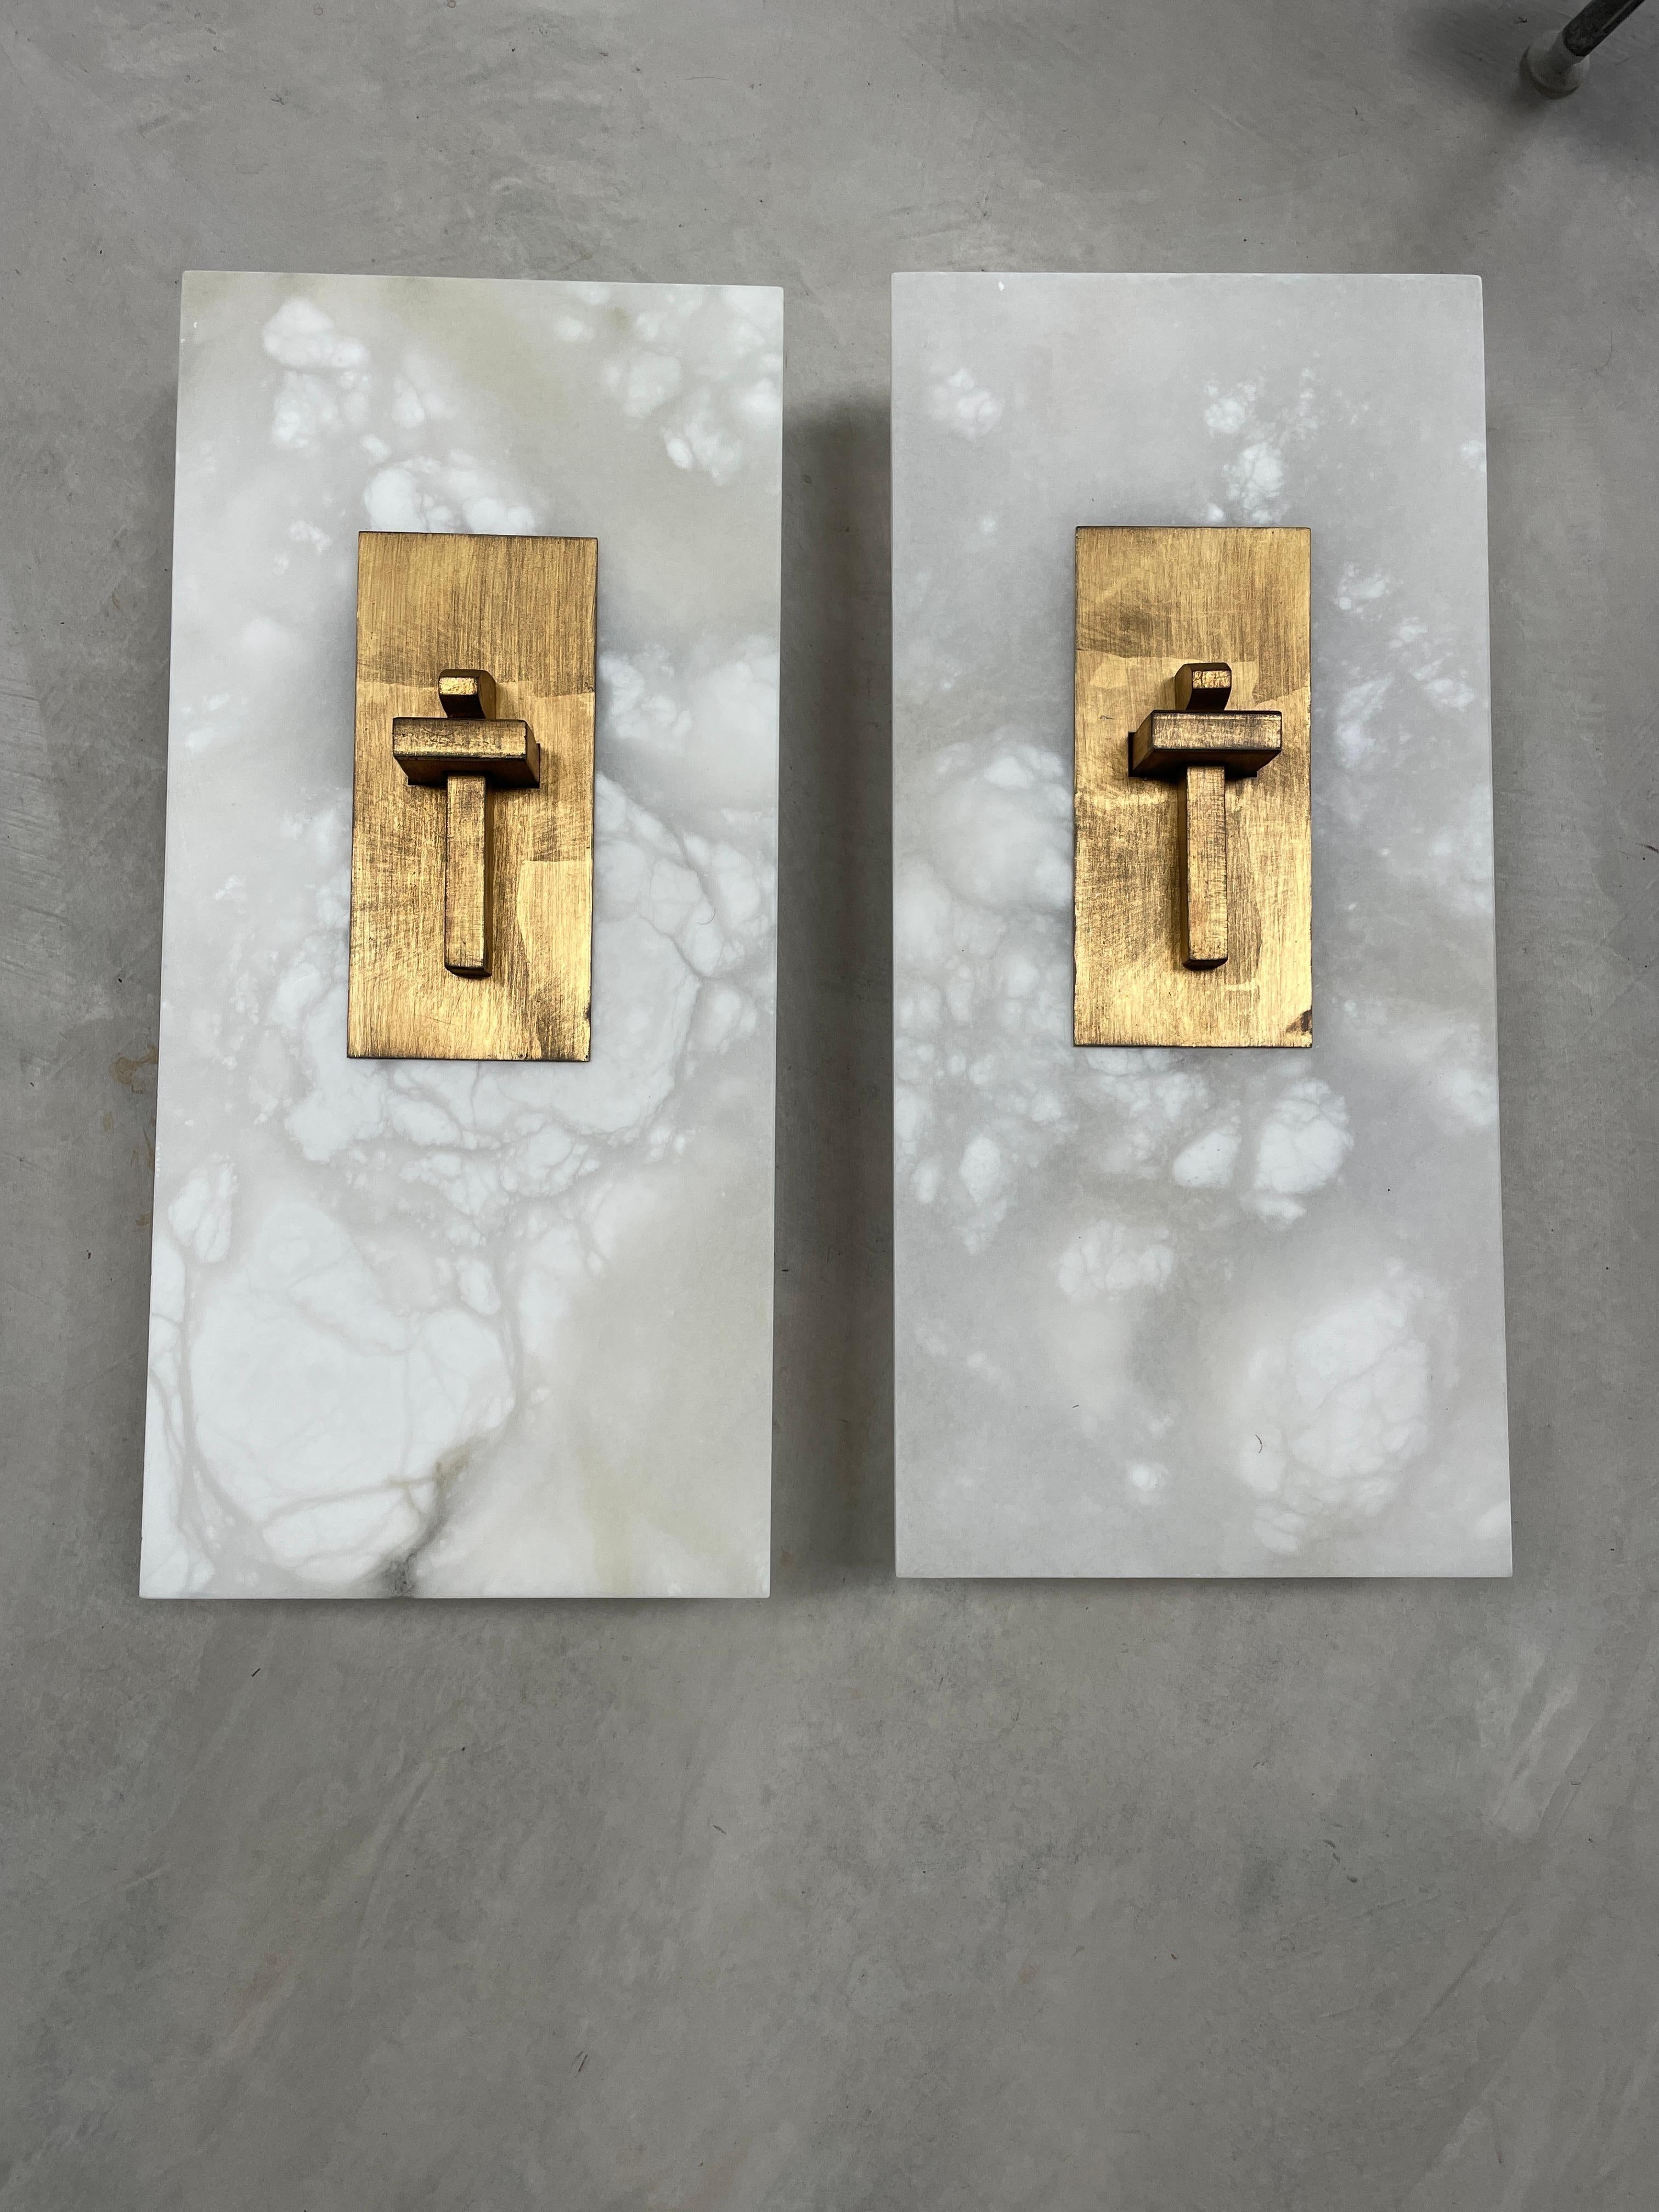 Add a touch of elegance to your home decor with this stunning pair of marble and metal wall sconces. The contemporary design features a rectangular shape, hardwired power source, and a light sensor type. The sconces are made with high-quality metal